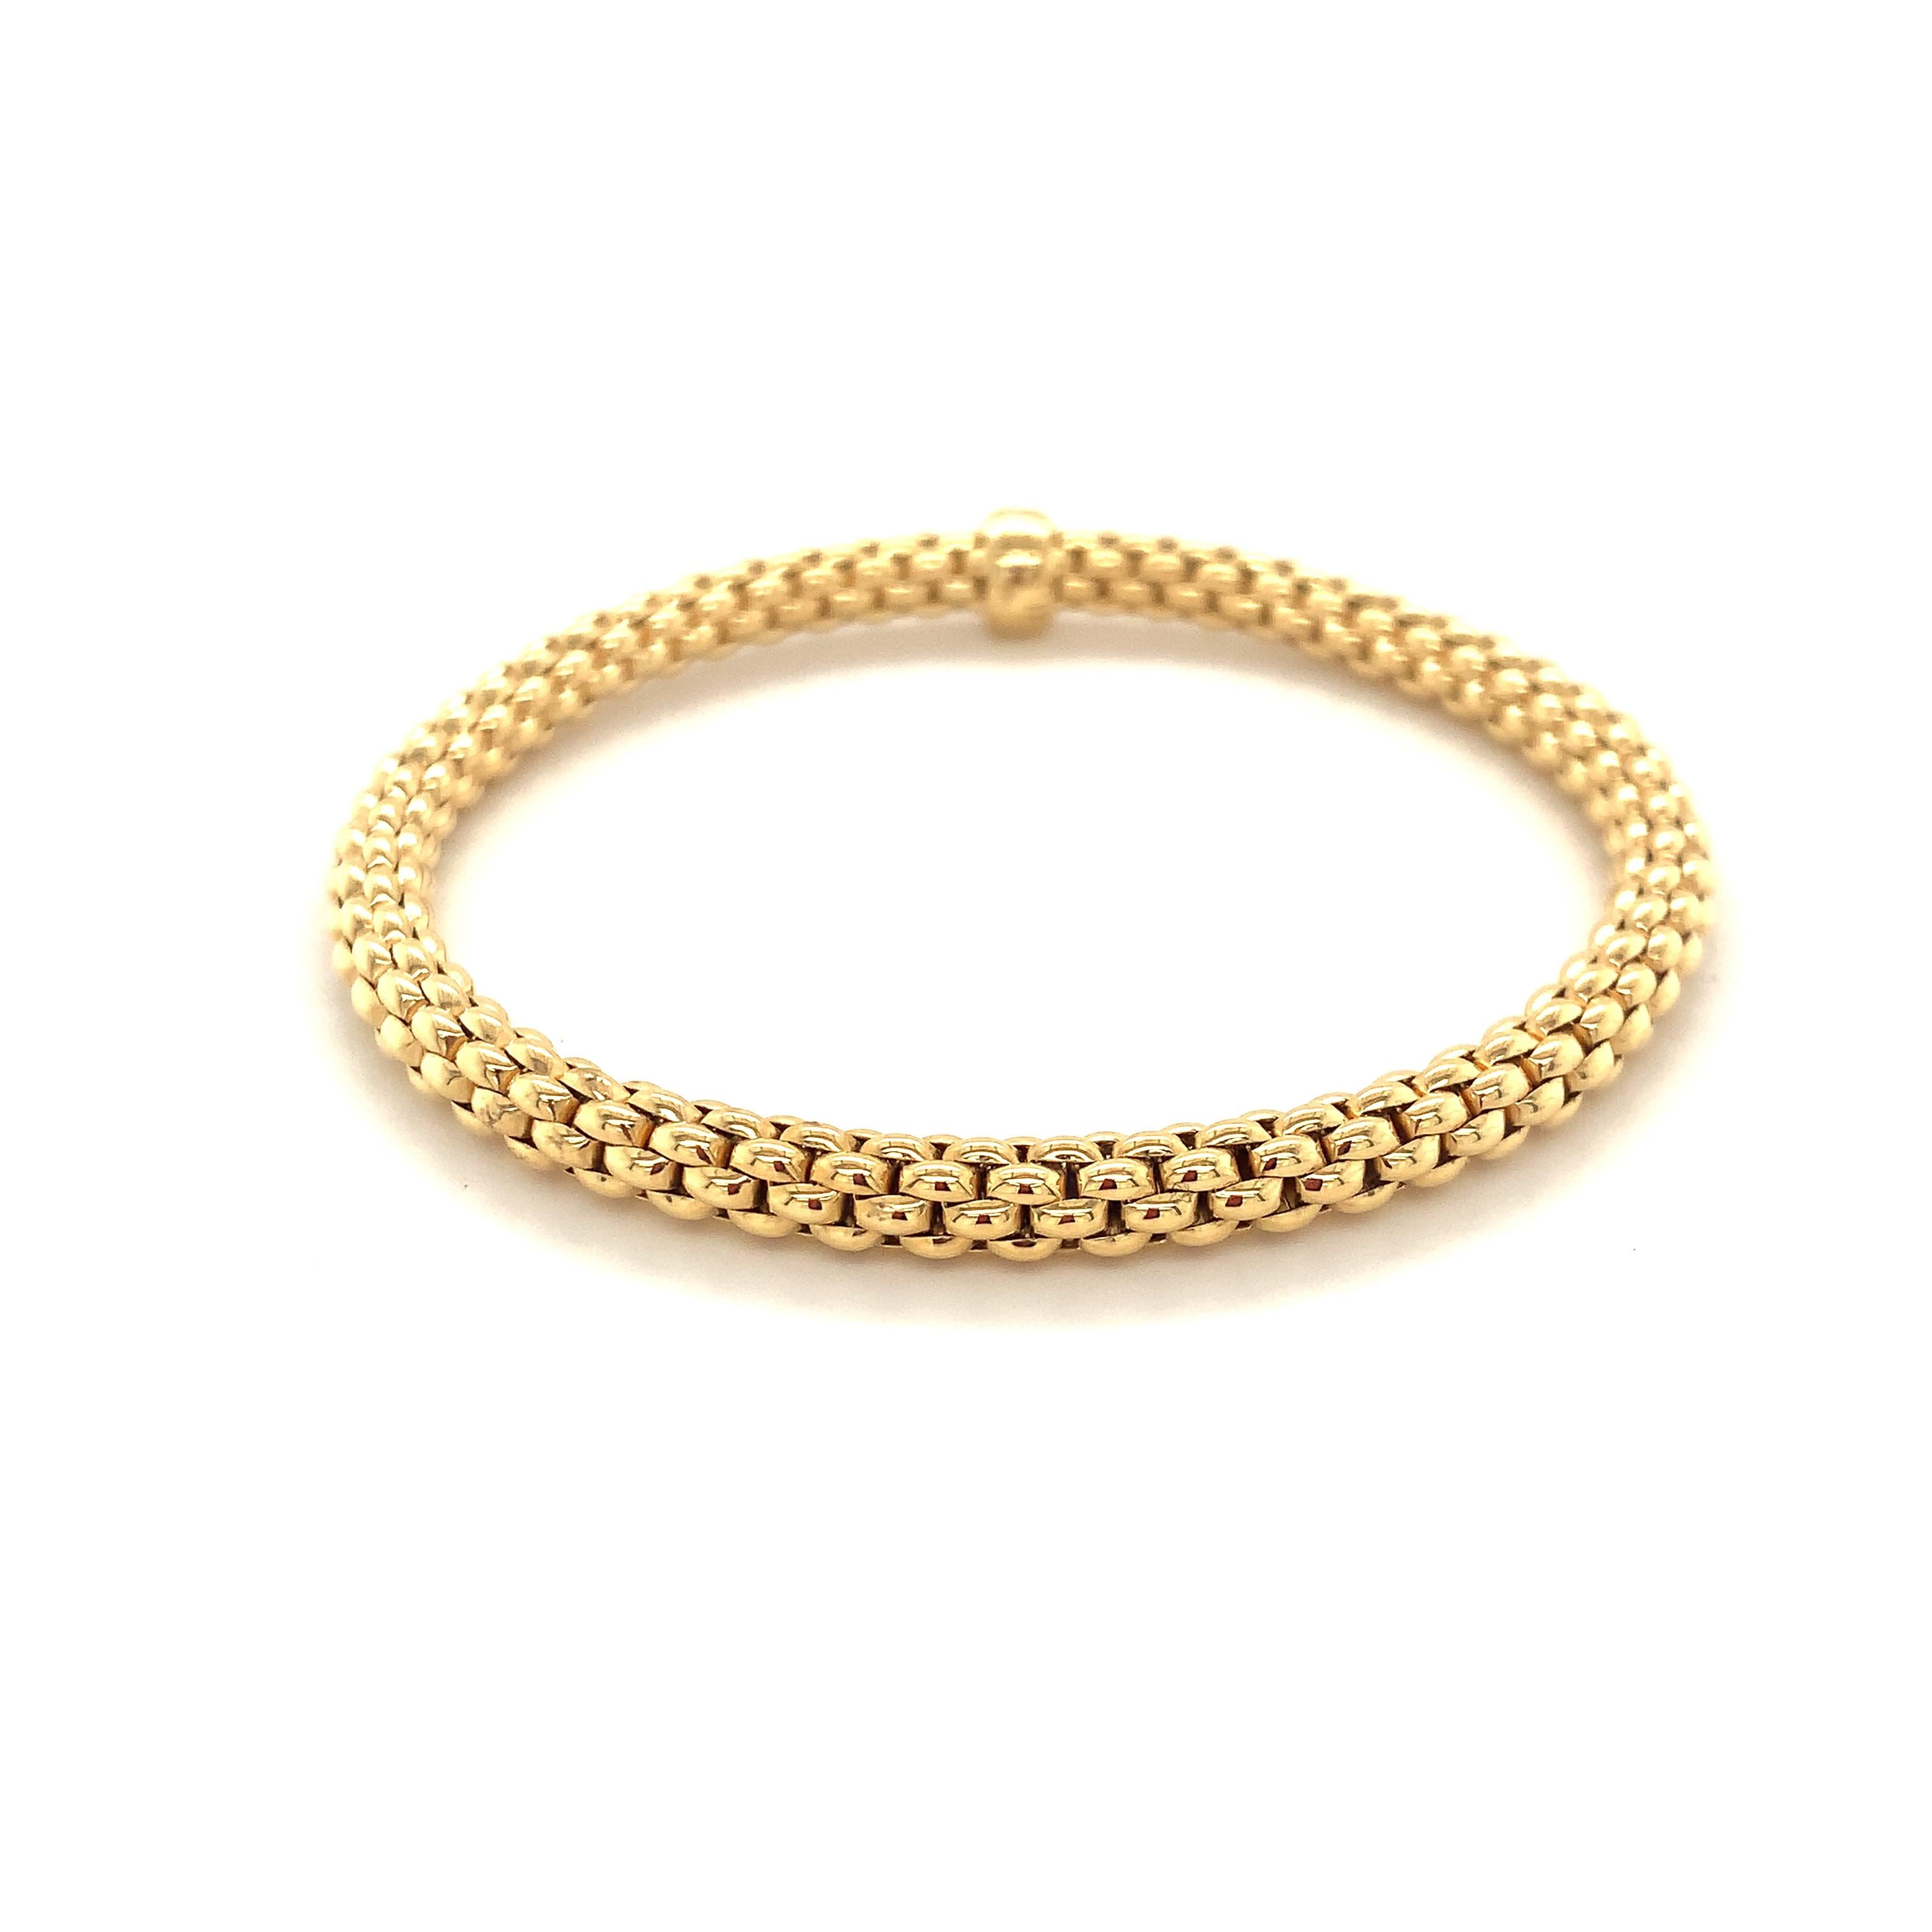 Flexible bracelet entirely made of 18 carat gold with gold rondel (no stones). This mesh chain hides dozens of tiny 18 carat gold springs which make the bracelets and rings smooth and flexible.

Stock Size: 175mm / 17cm / 6.69in
Style: